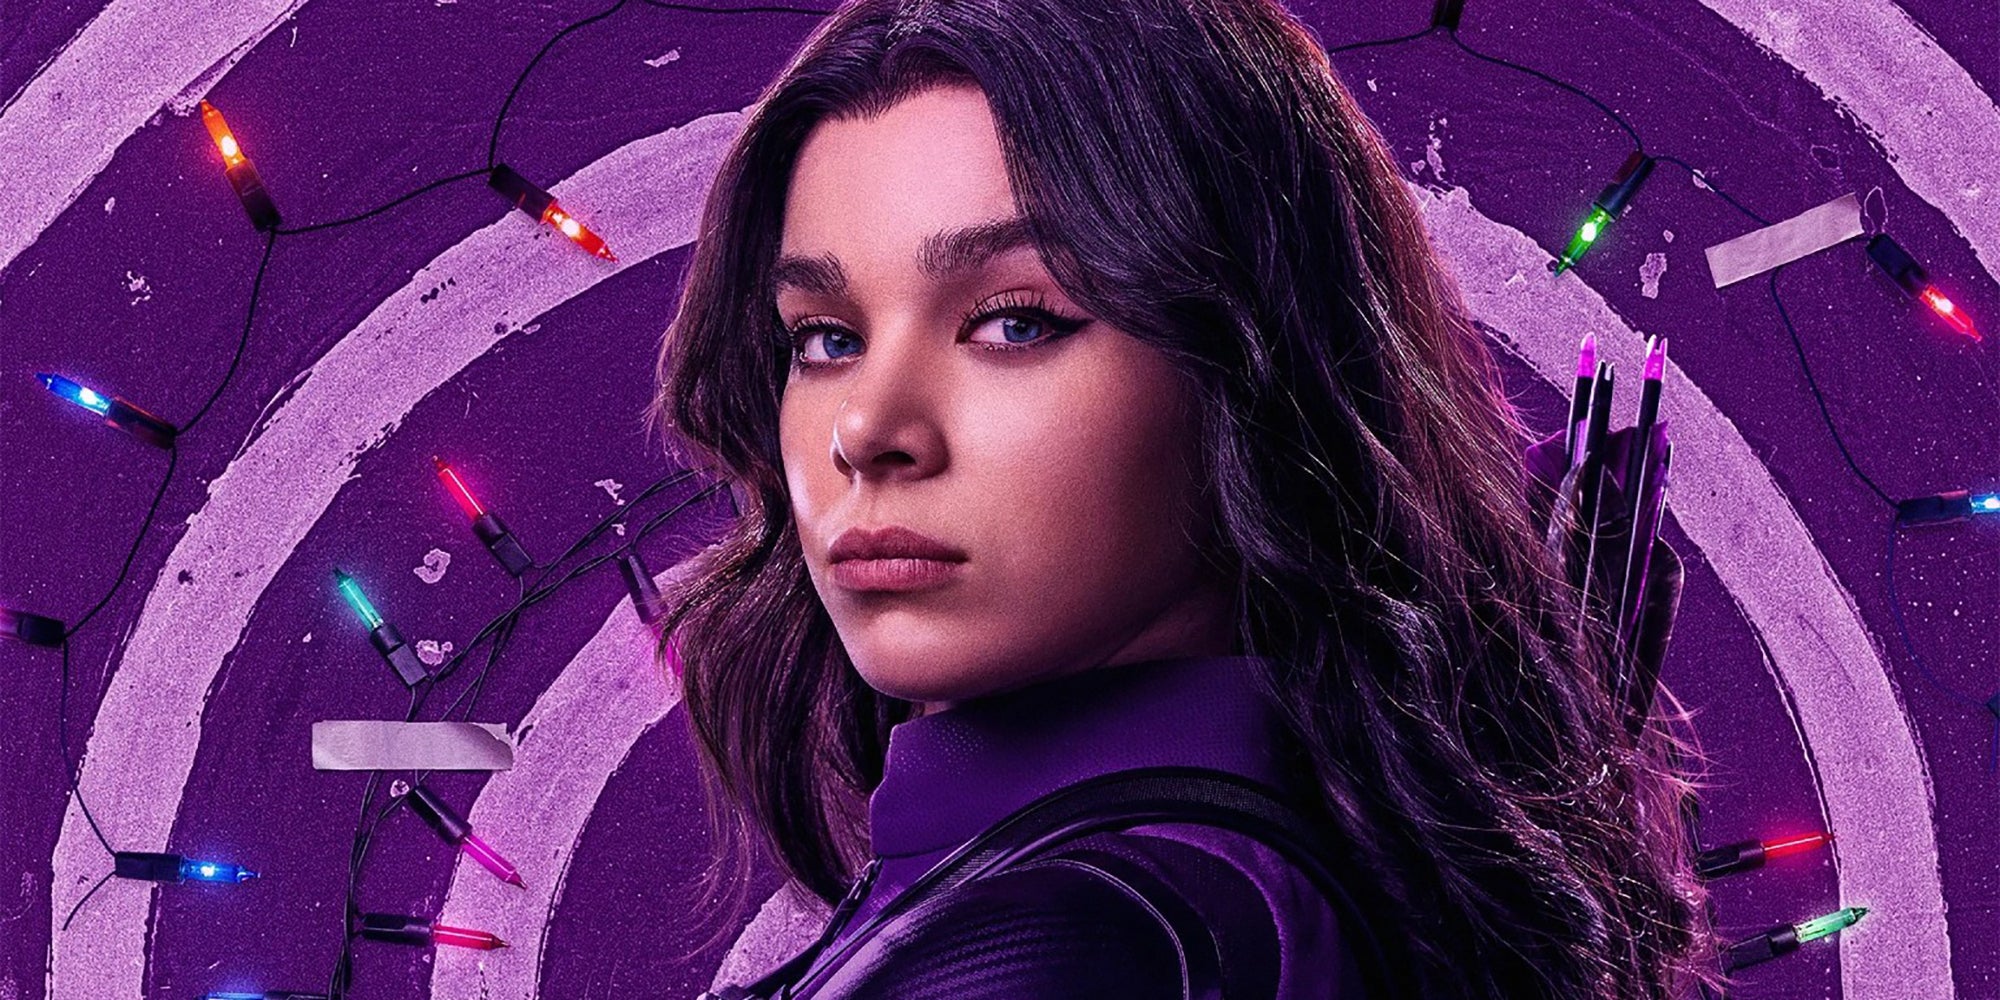 Kate Bishop Character Poster: A promotional poster for the Disney+ show Hawkeye, featuring Hailee Steinfeld as Kate Bishop posing in her purple costume in front of Christmas lights.